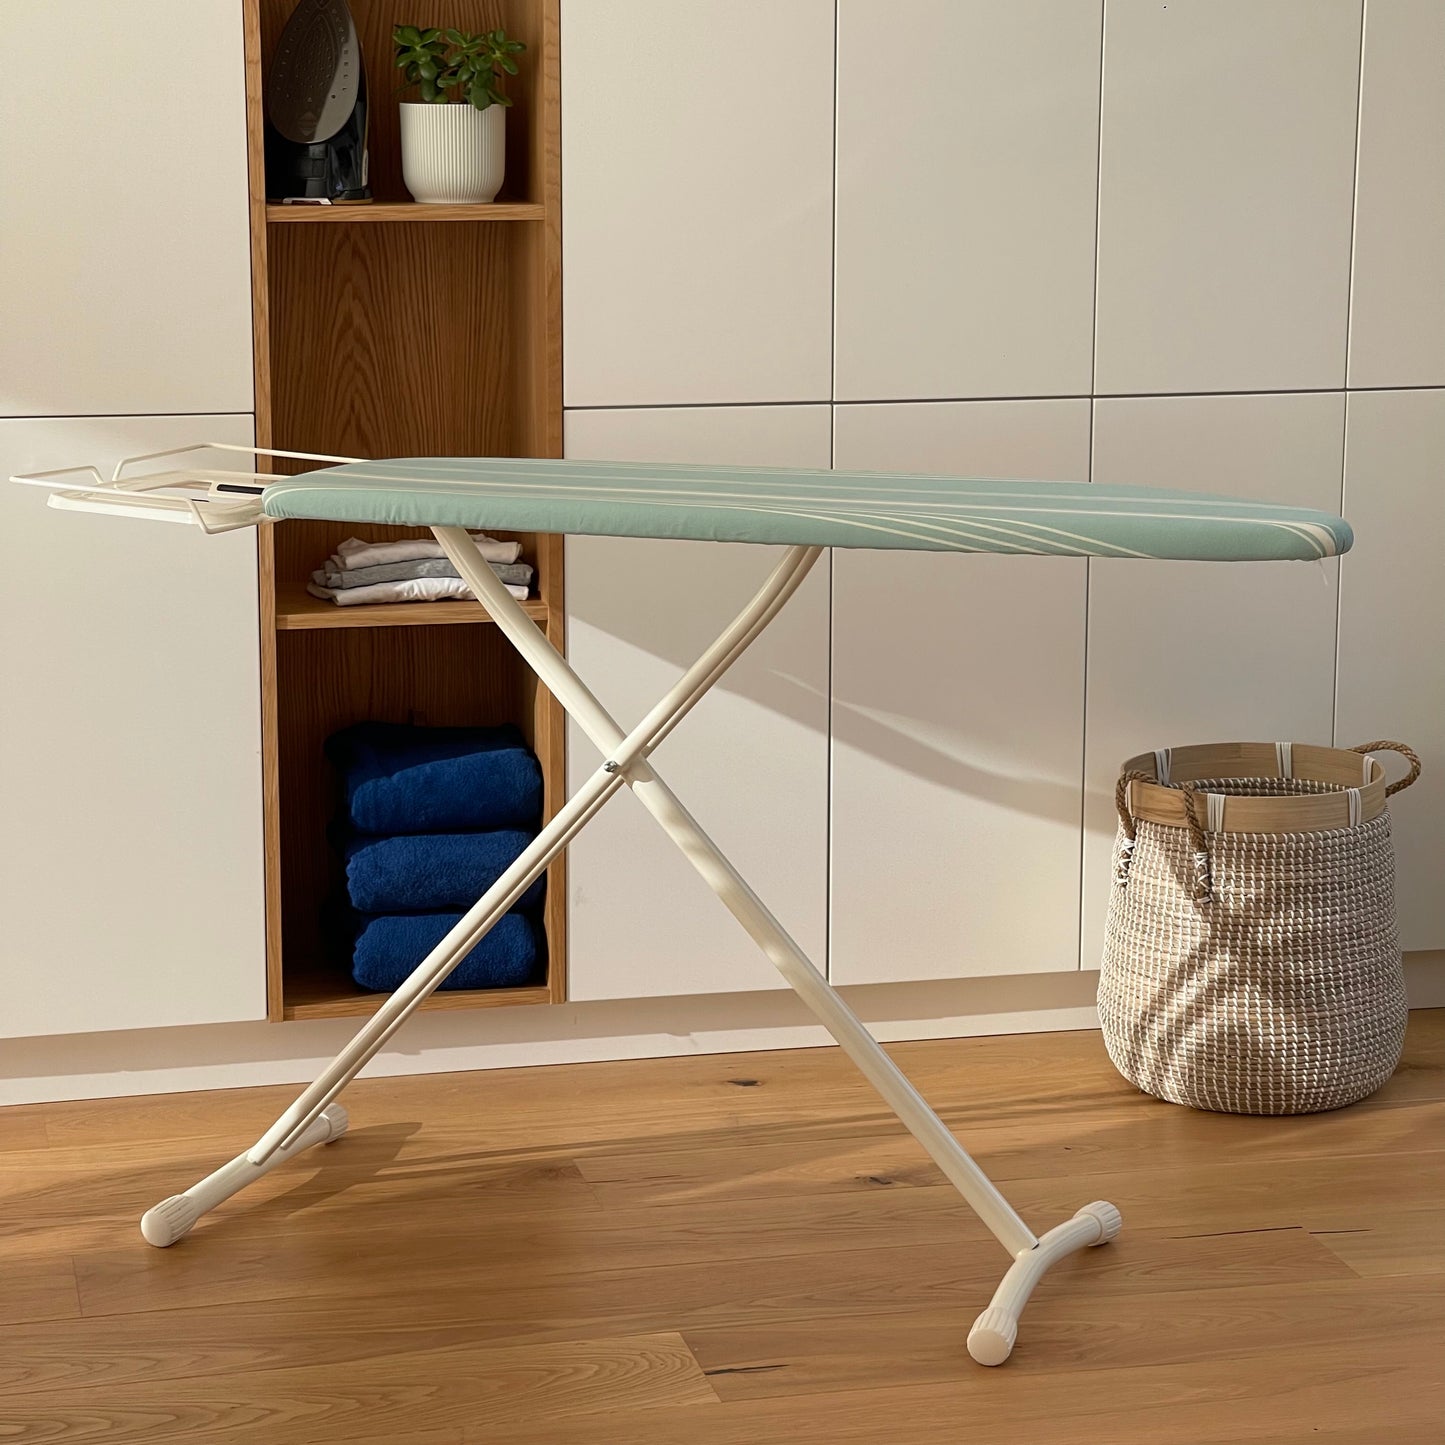 BERMUDE steel foldable ironing board 124x40 H94cm with iron rest and steam station rest